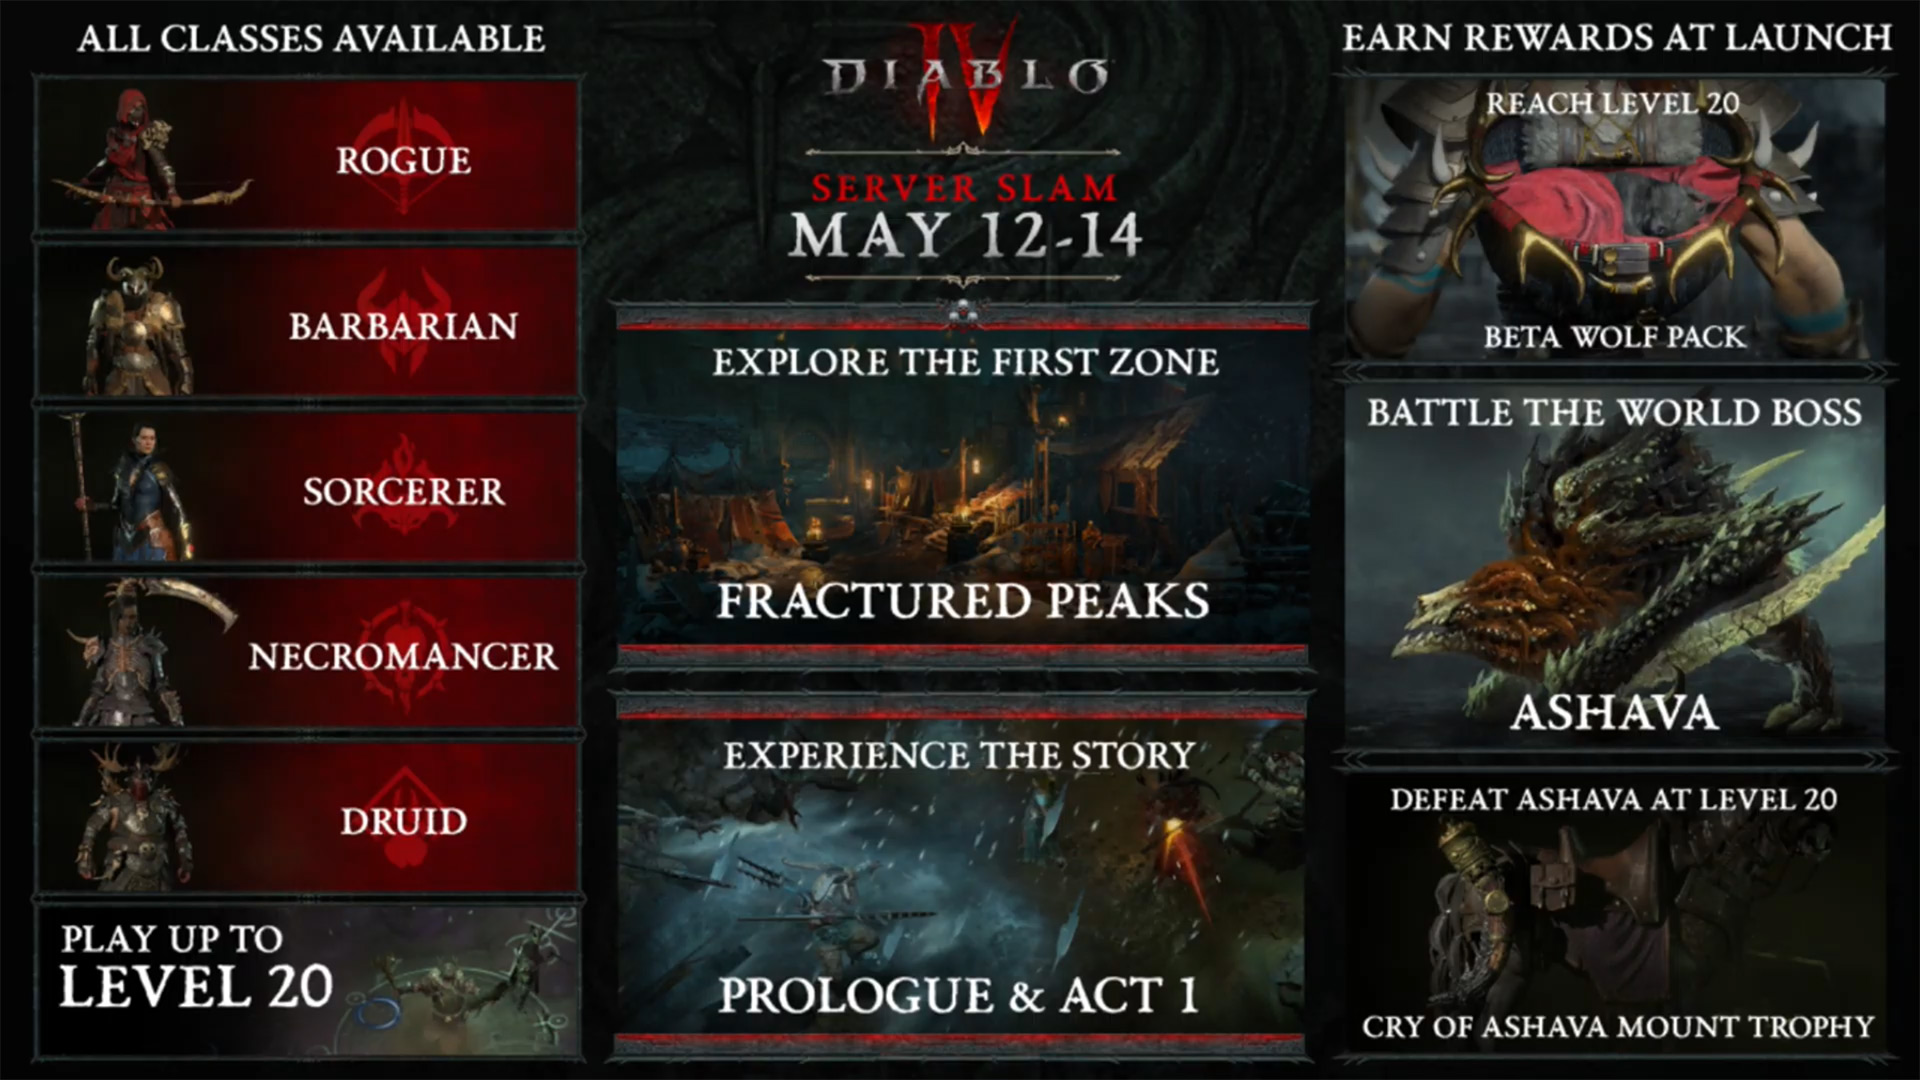 Diablo IV is getting another open beta from May 12 to May 14